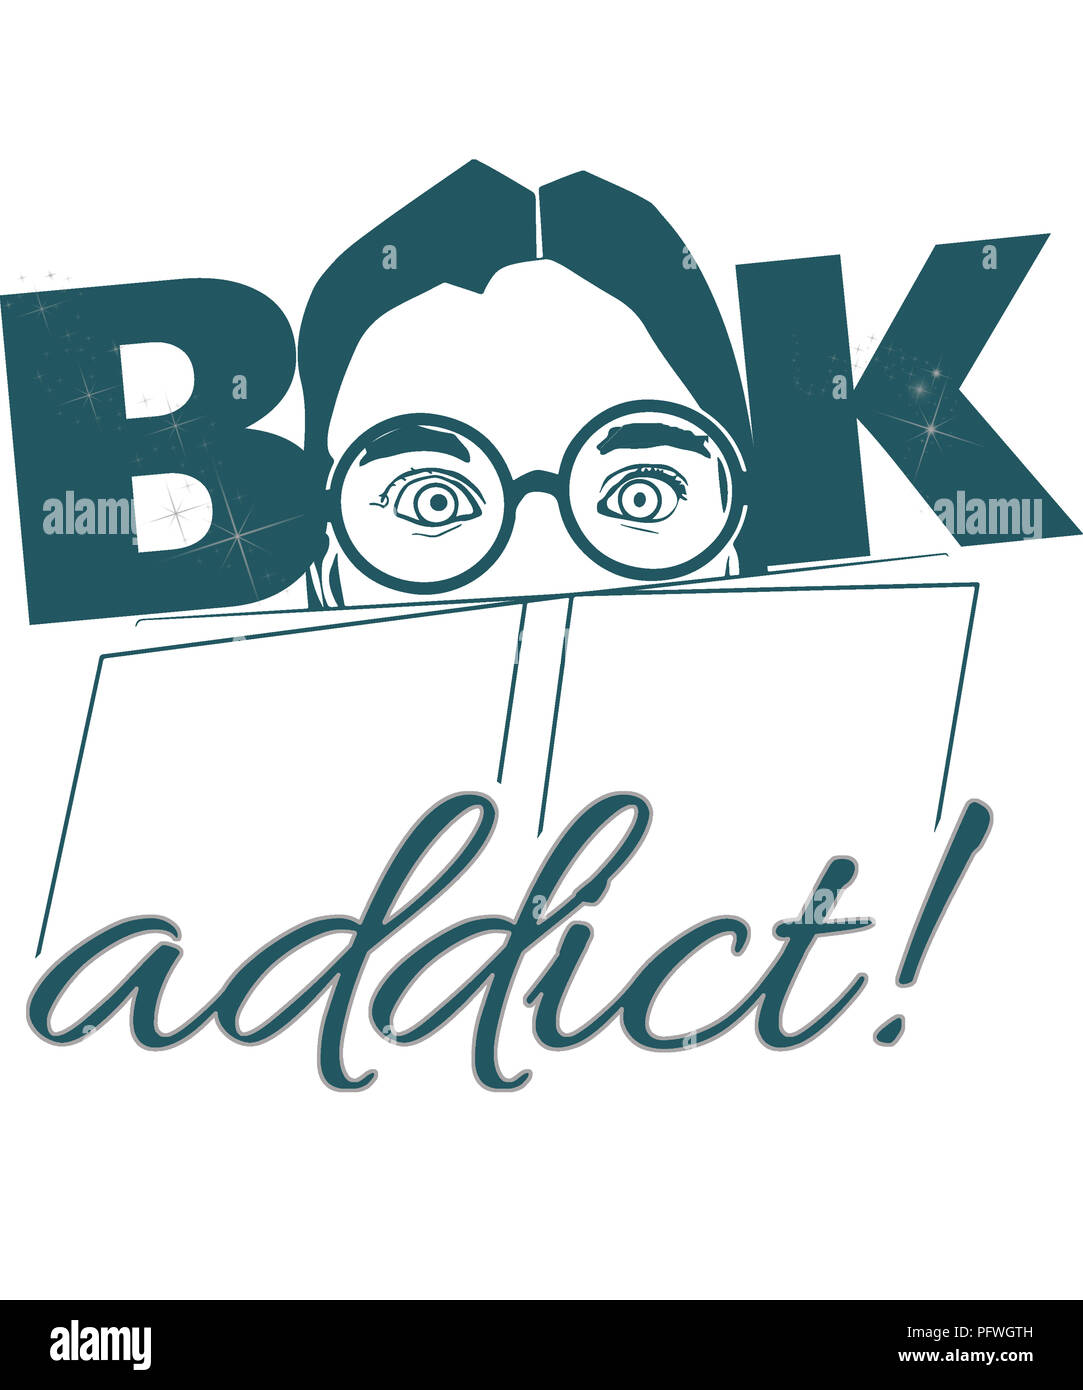 Book addict graphic illustration with teal colored font.  The double oo are the girls' glasses. Stock Photo